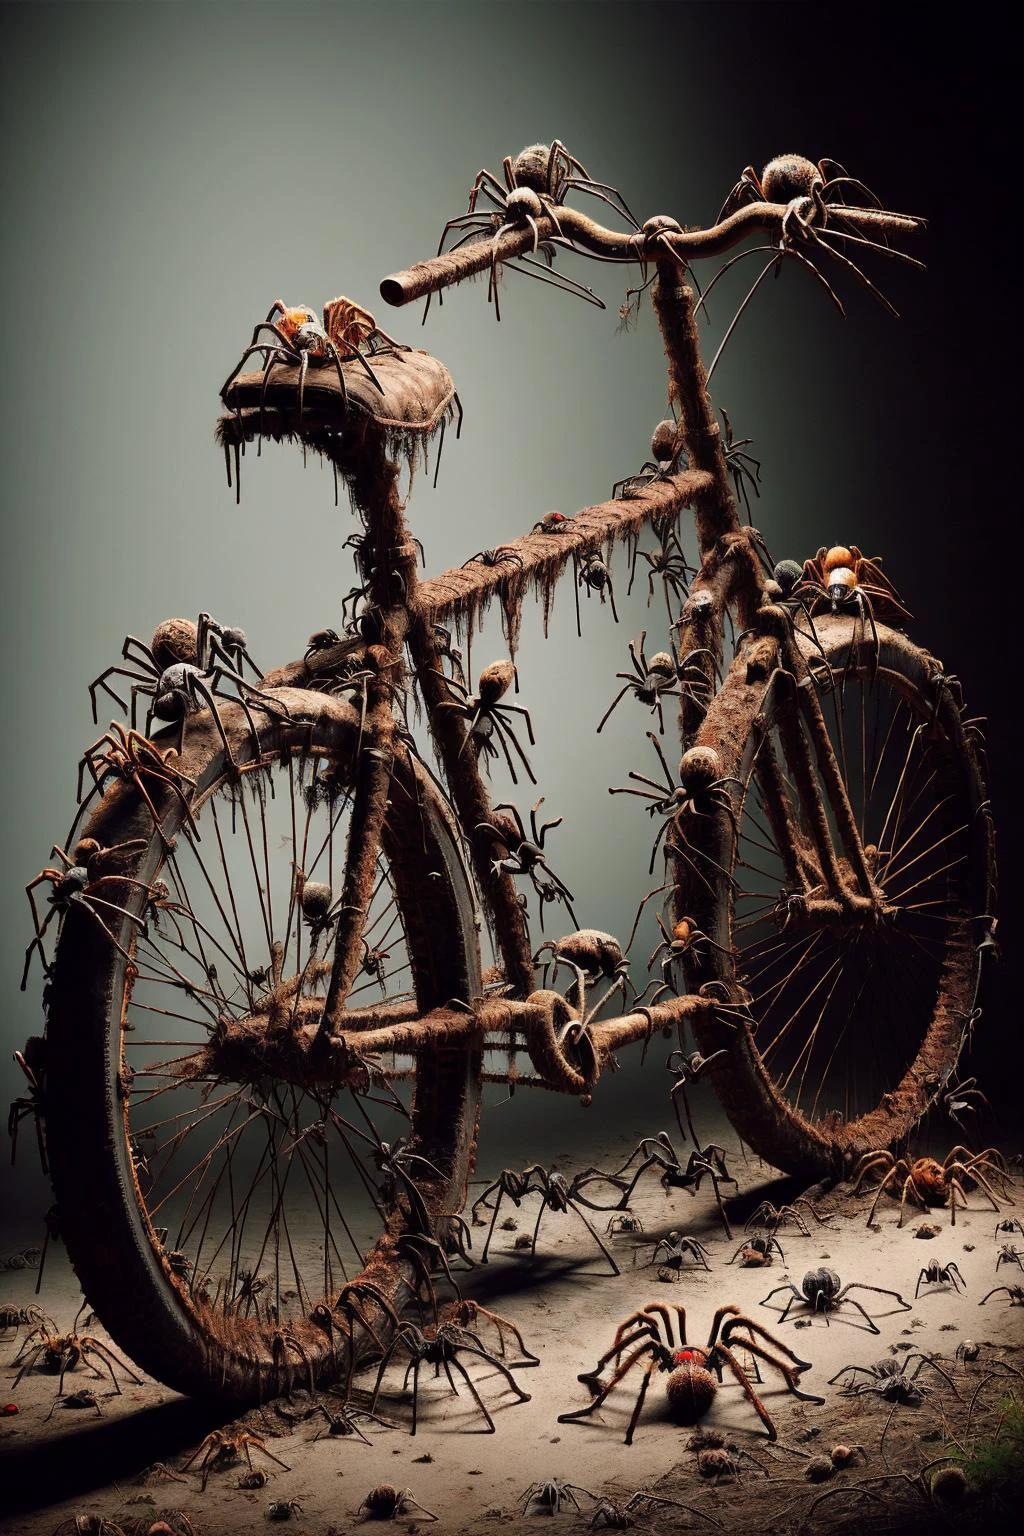 Ais-spiderz on a rusty bicycle, in a forgotten barn 